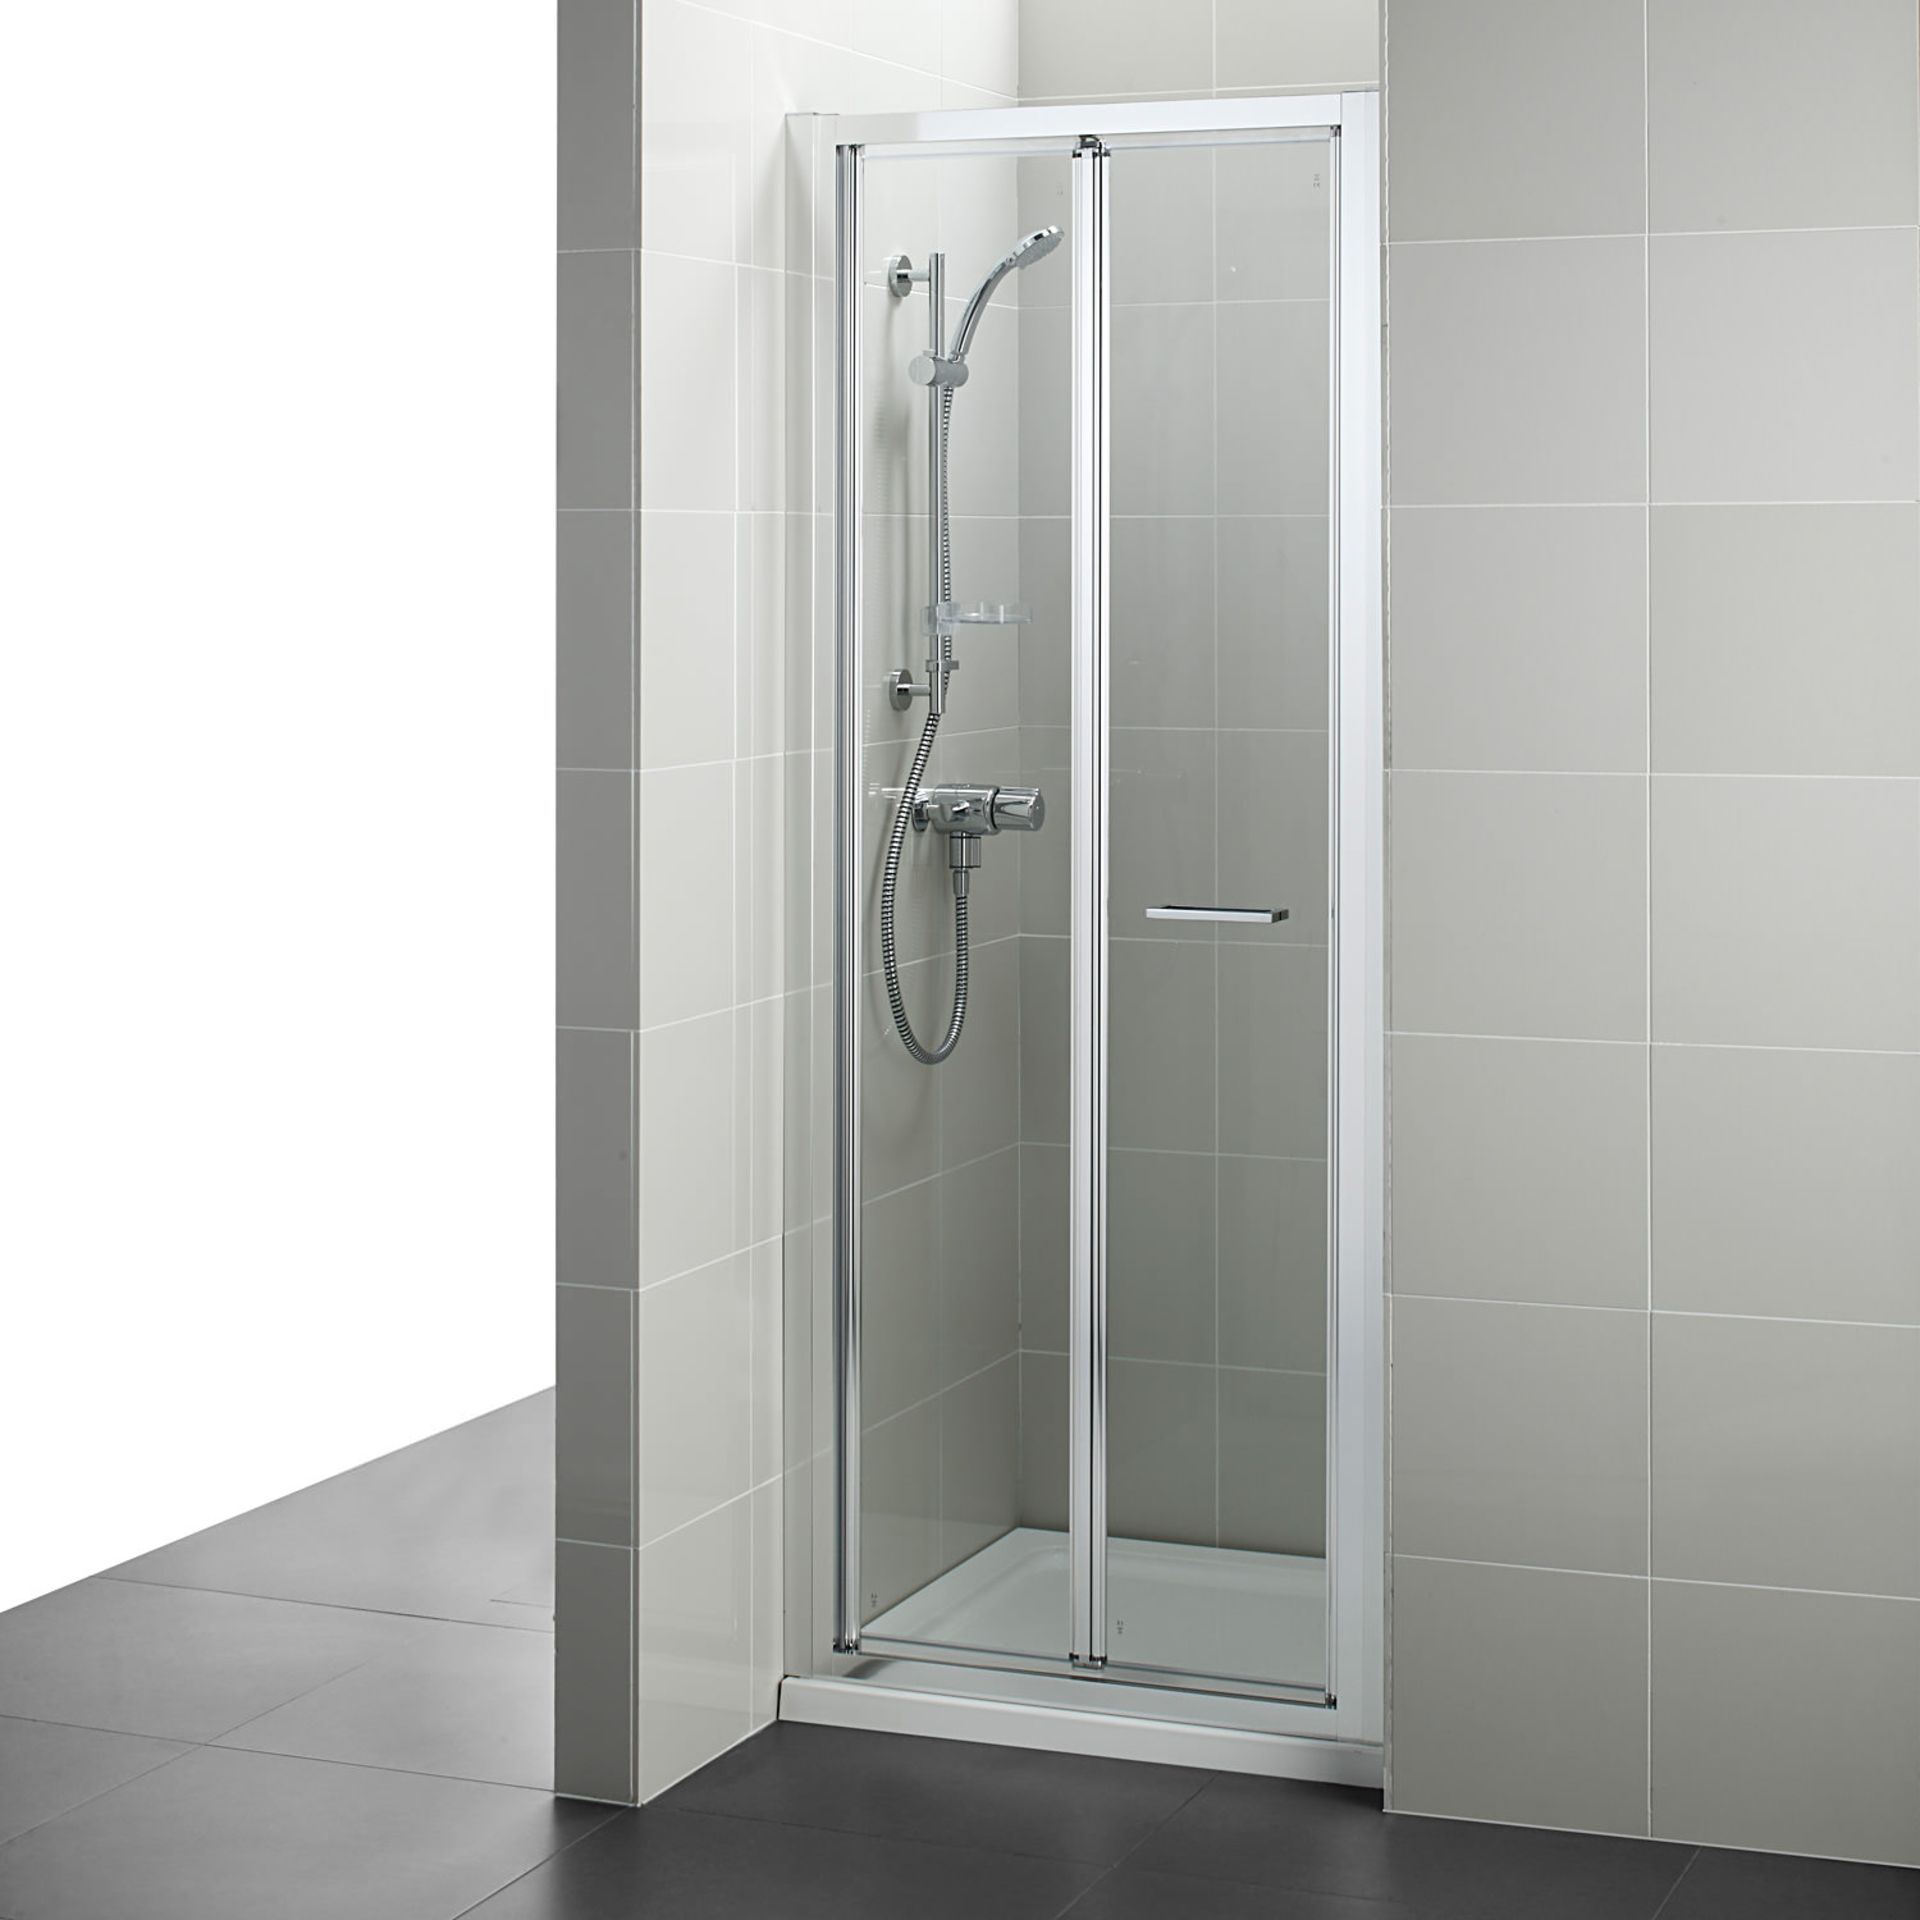 (RR112) 760mm White Bi-Fold door. RRP £299.99. Folding shower doors are great for showers with...((